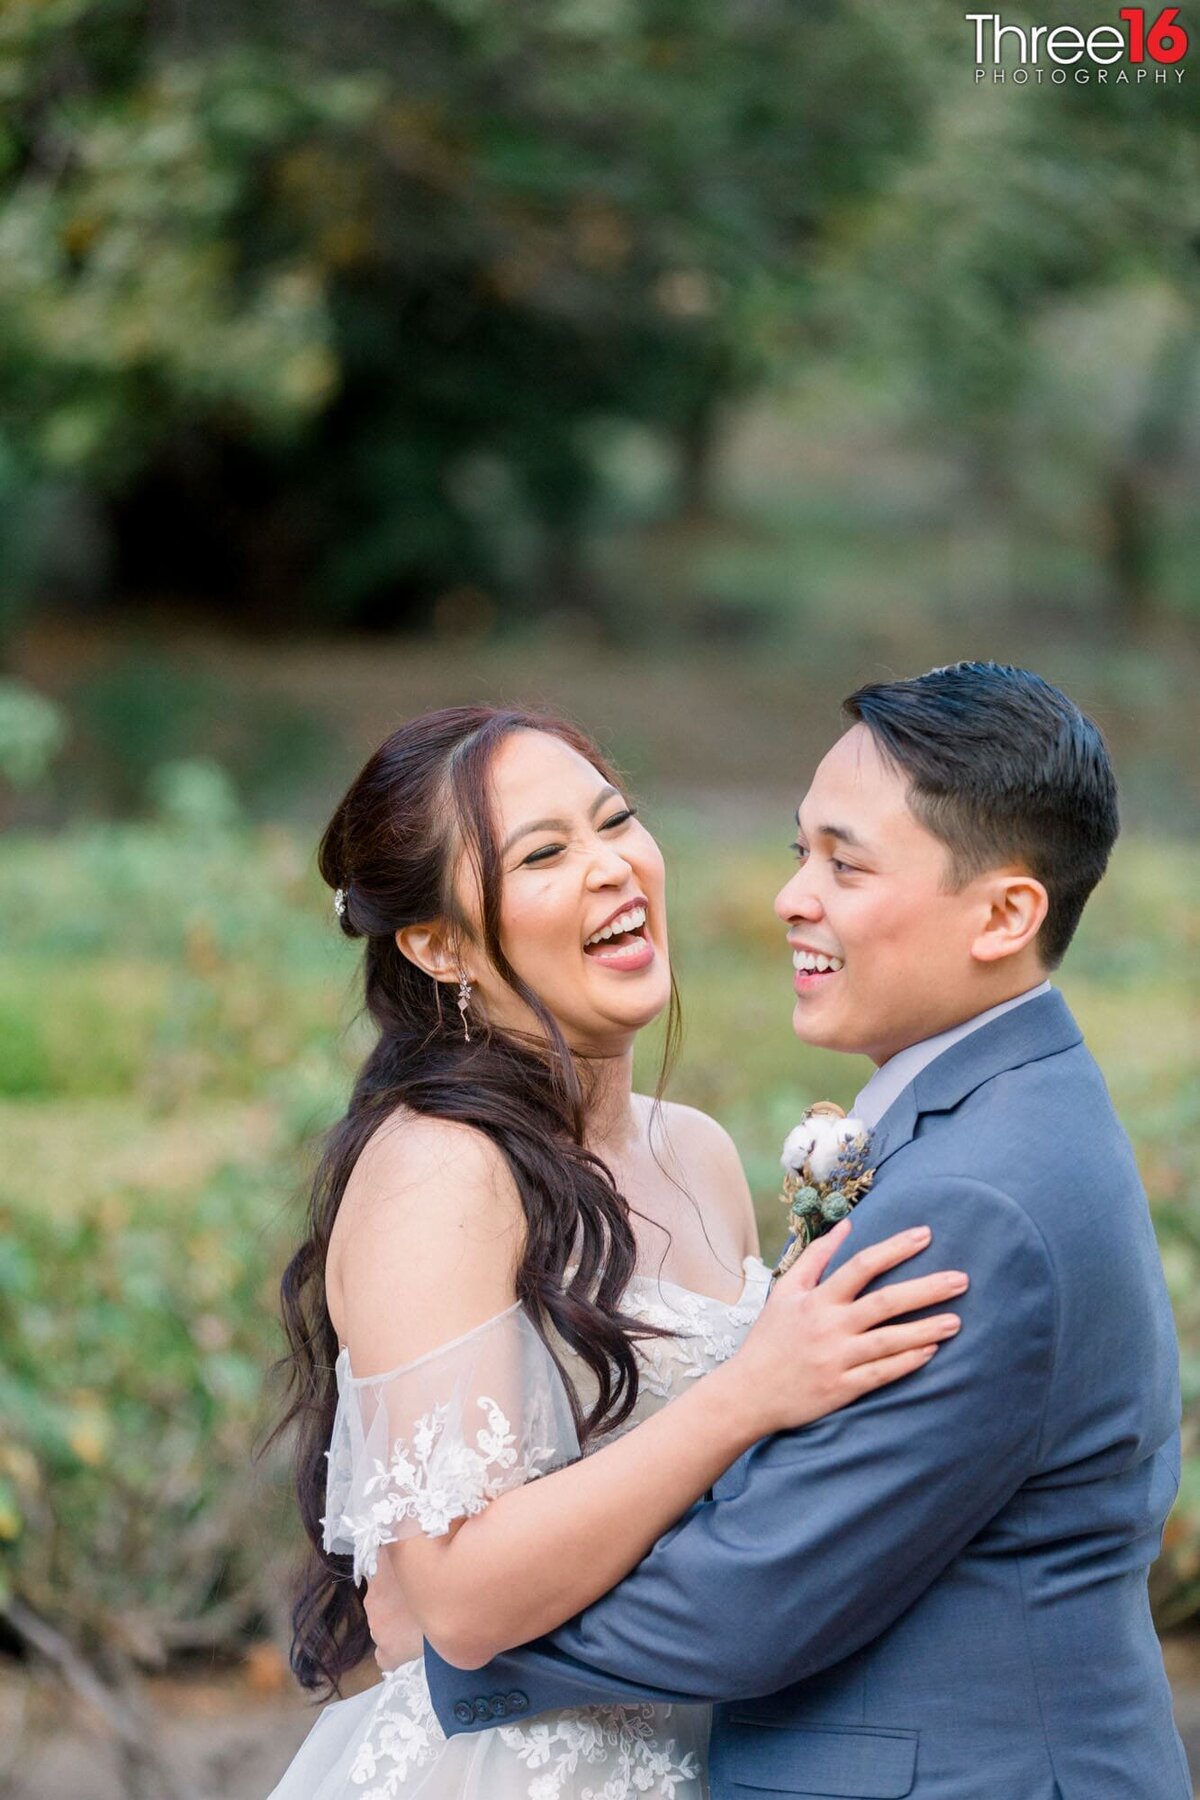 Bride begins to laugh as her and her Groom embrace each other